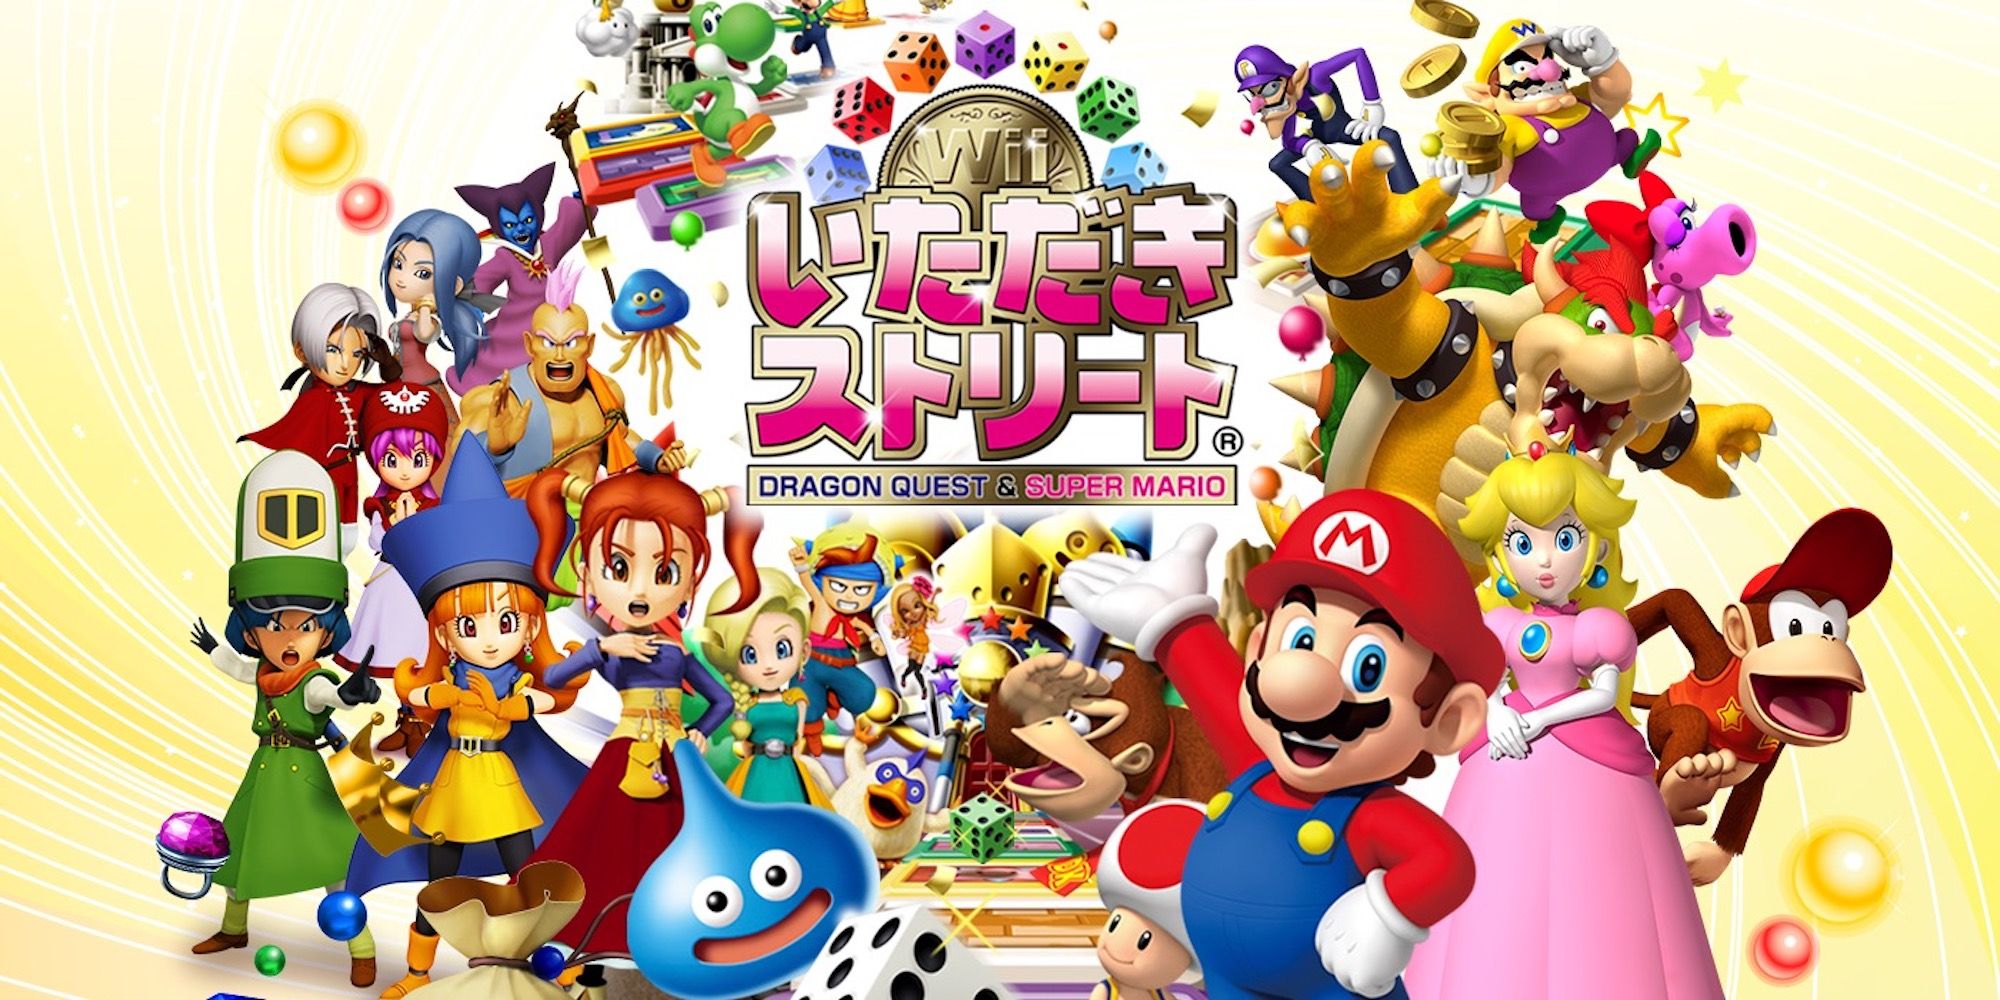 Promo art featuring characters in Fortune Street